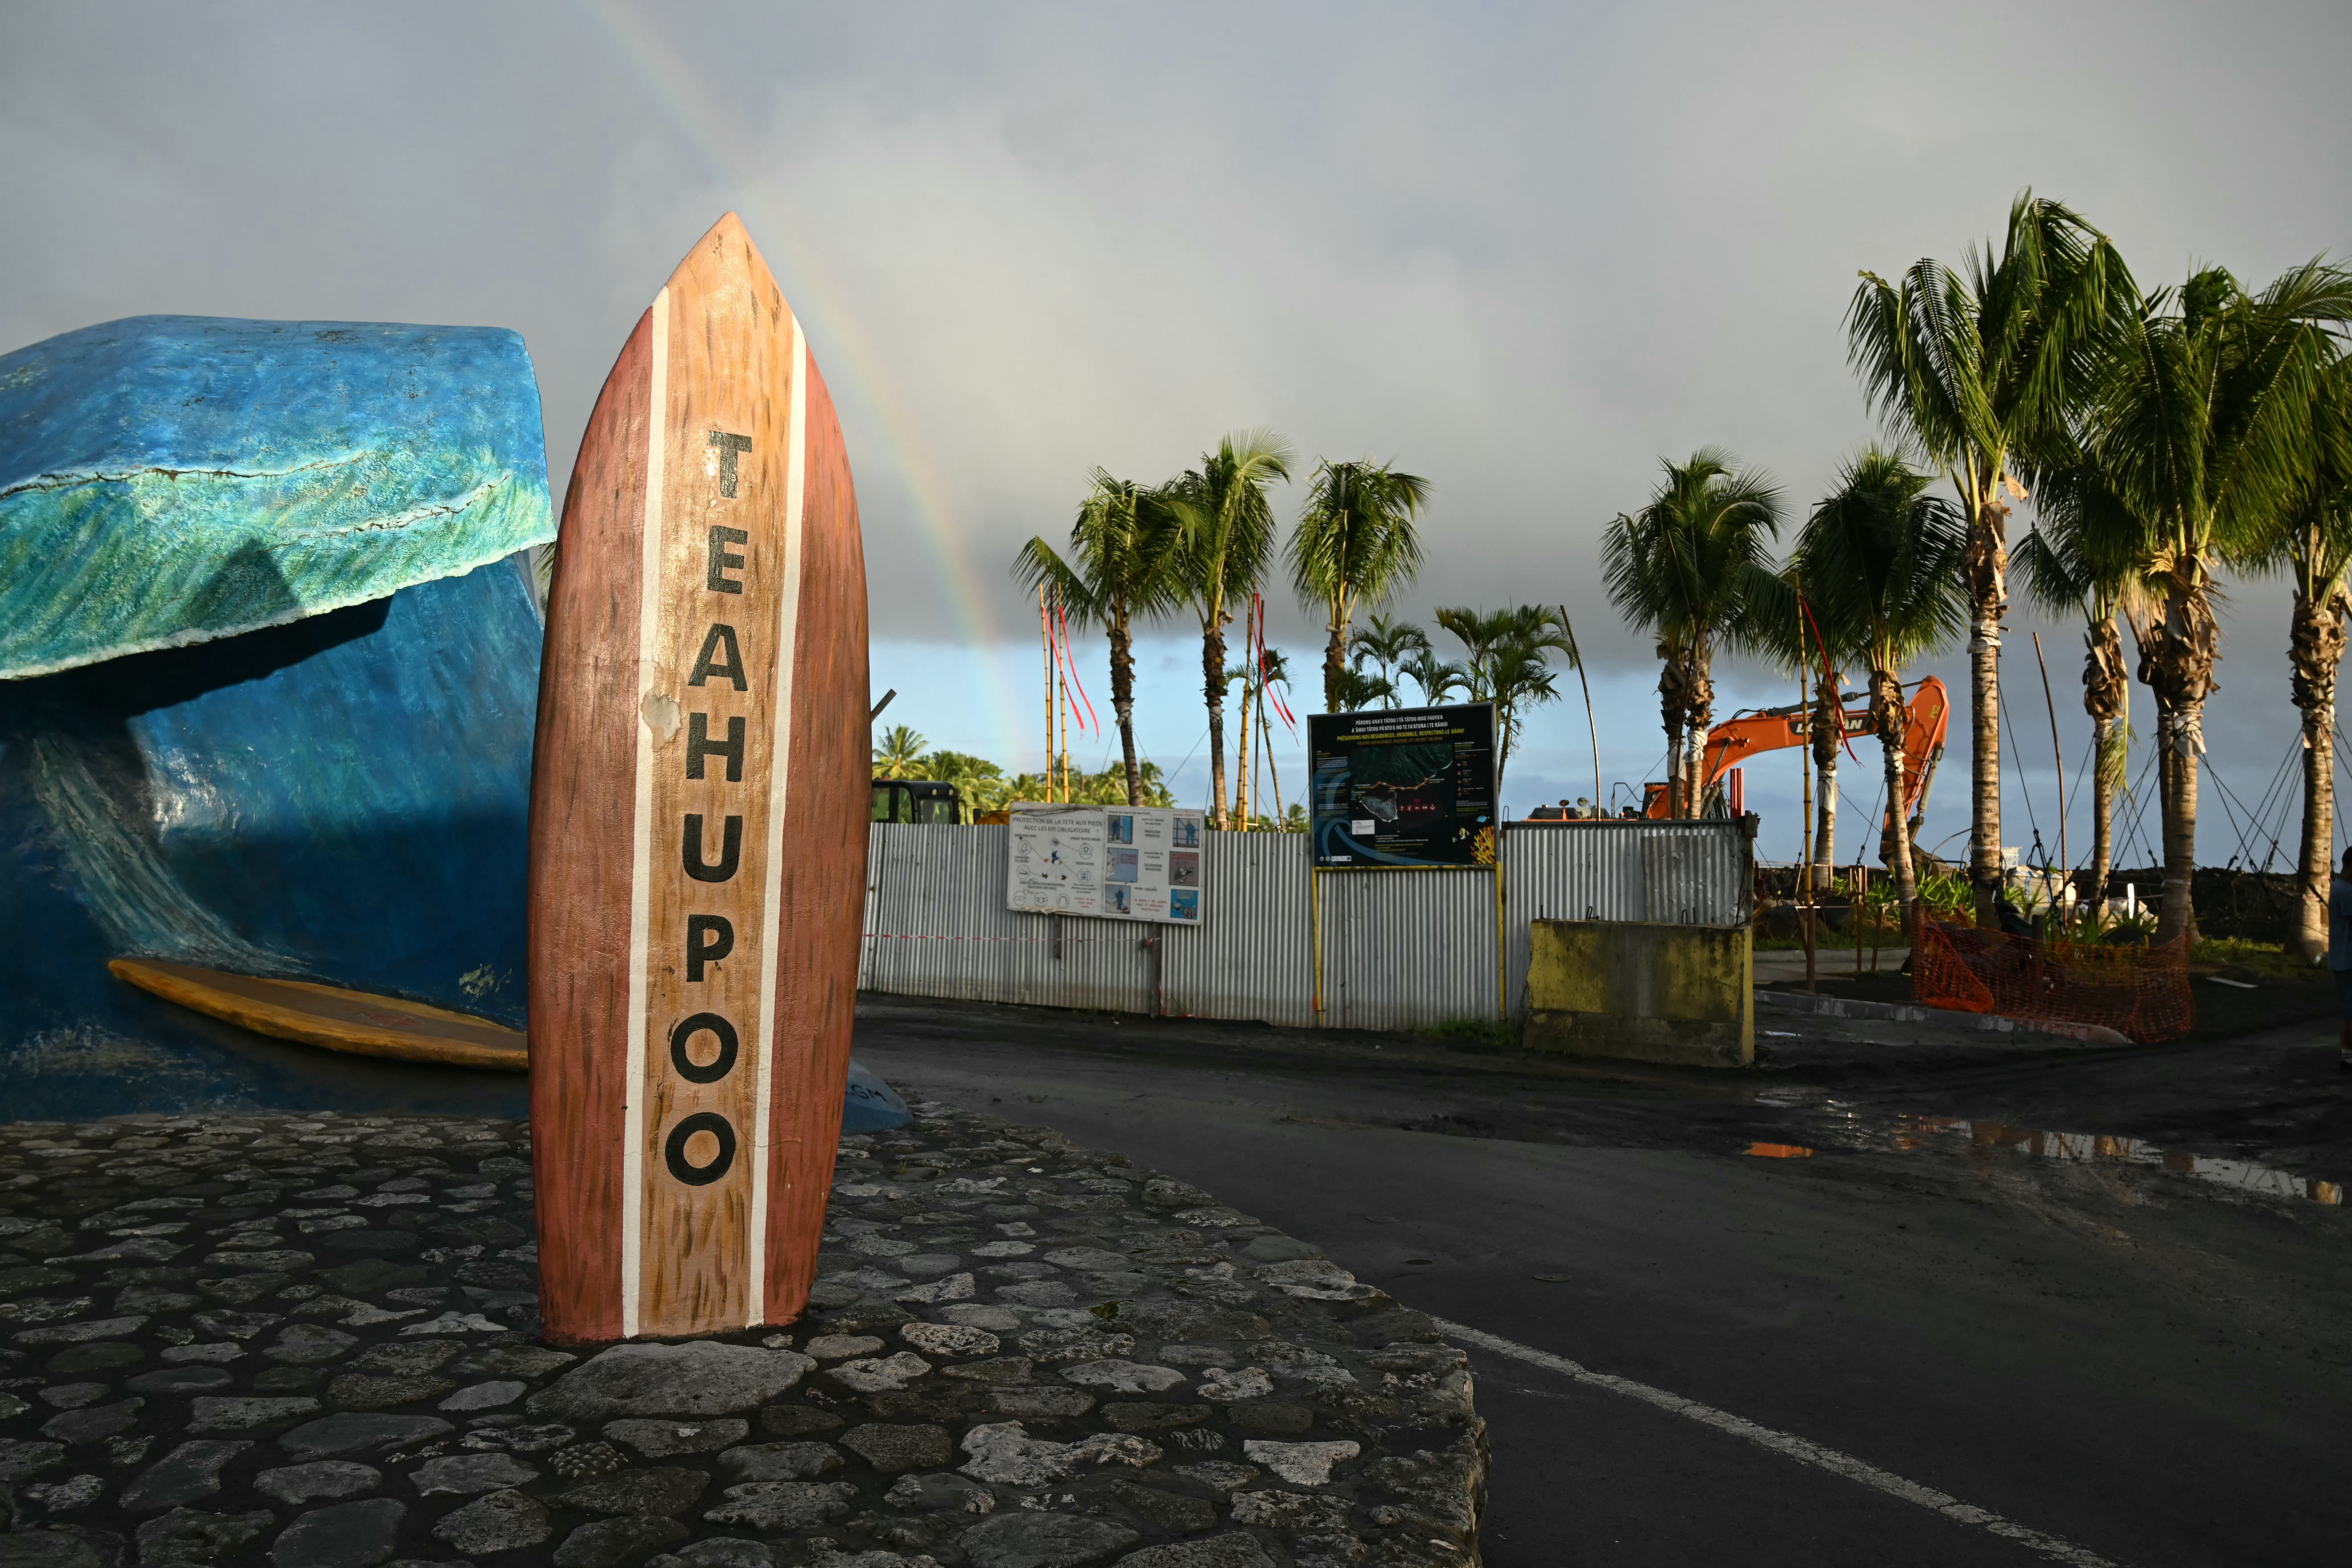 Tahiti Surfing Venue for 2024 Olympics Will Damage Coral Reef, Residents and Surfers Say